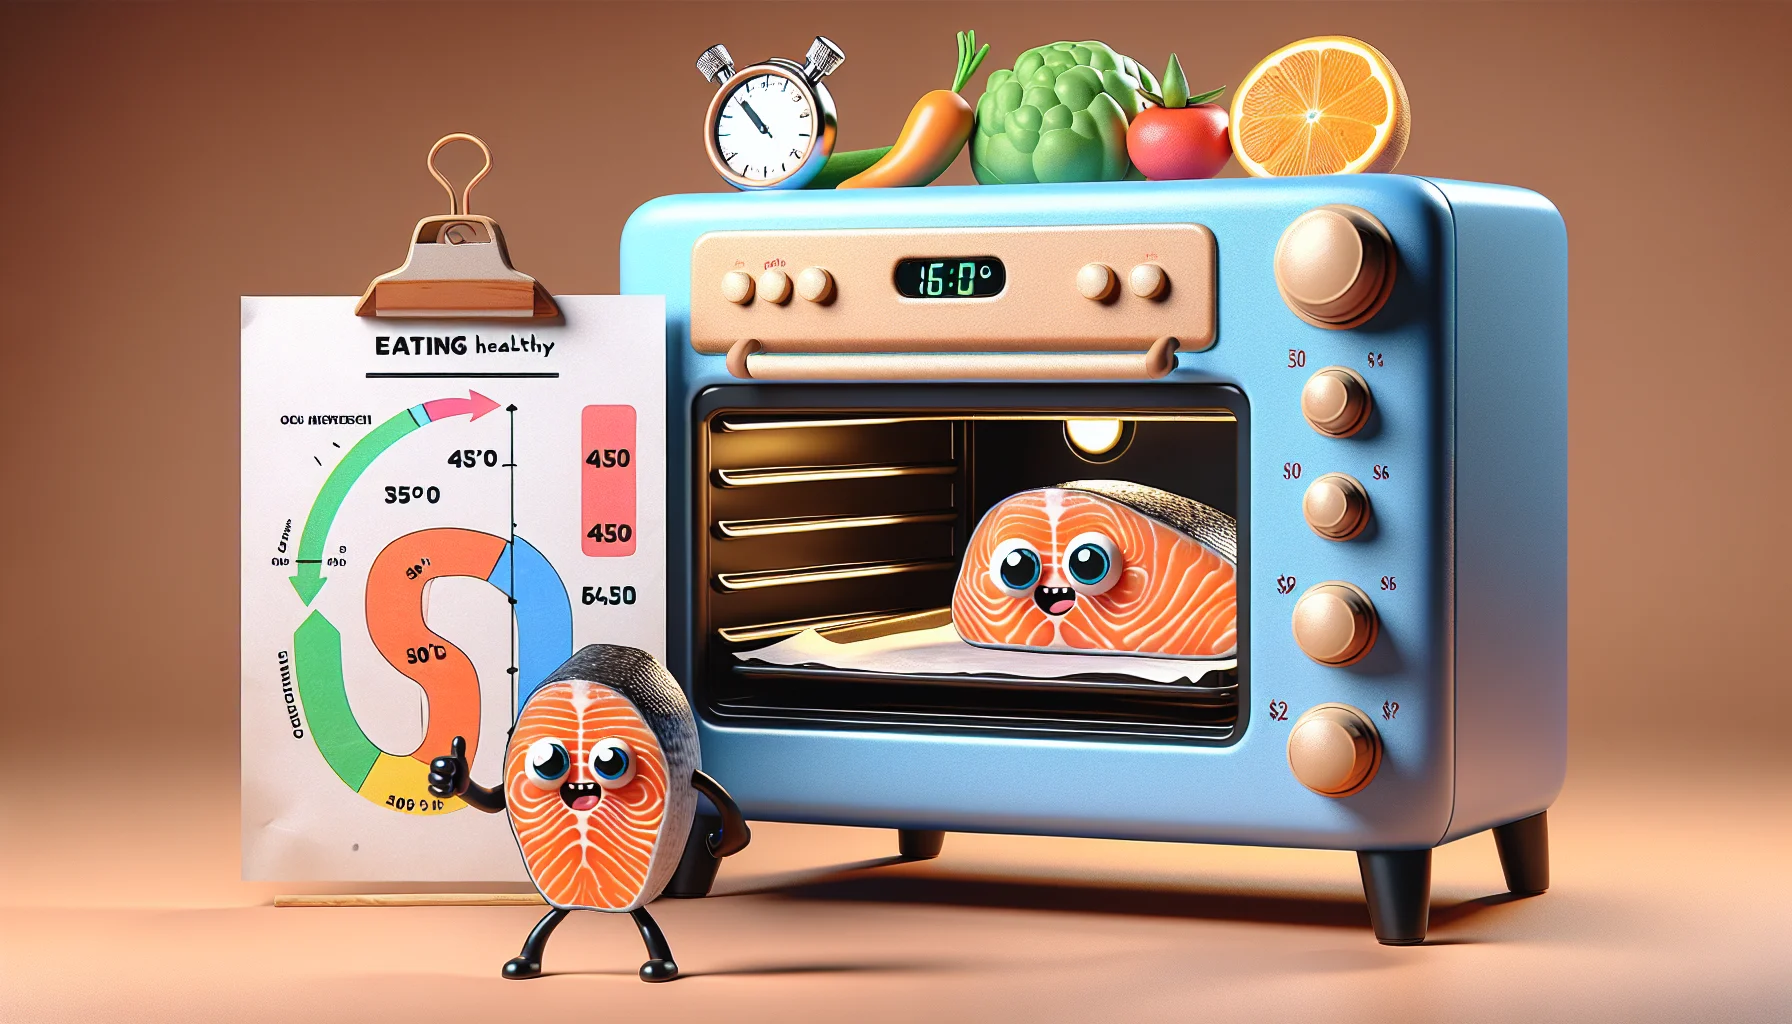 Create a humorous and realistic scene featuring a cartoonish oven with expressive features (glowing eyes, smiling mouth), which proudly displays an illustrated diagram next to it. On the diagram, a piece of salmon being baked at 450 degrees Fahrenheit has a stopwatch with a specific time written on it. The salmon piece, with small cartoon arms and legs, looks happy and is giving a thumbs-up. Behind the salmon, there's a rainbow of veggies and fruits forming a dollar sign to symbolize 'eating healthy for less money'. No people are included in this image.